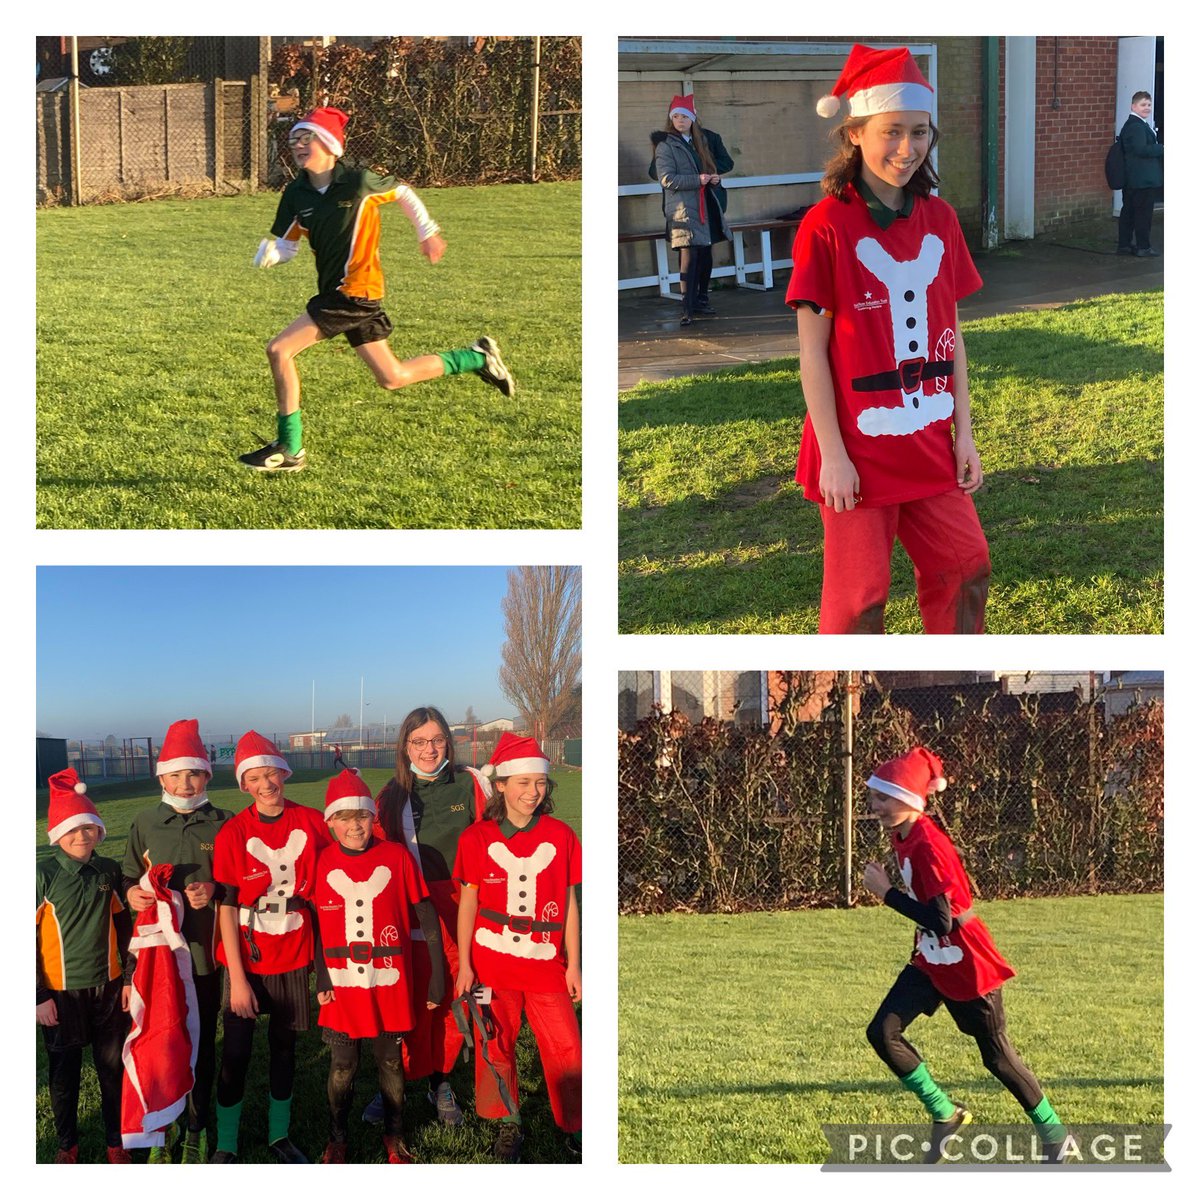 A fantastic start to the morning @SkegGrammar @SGS_PE in their DRET Santa Run! So proud to see so many of our students taking part in this fantastic event raising money for the Inspiration Fund @DRETsport @DRETevents 🎅